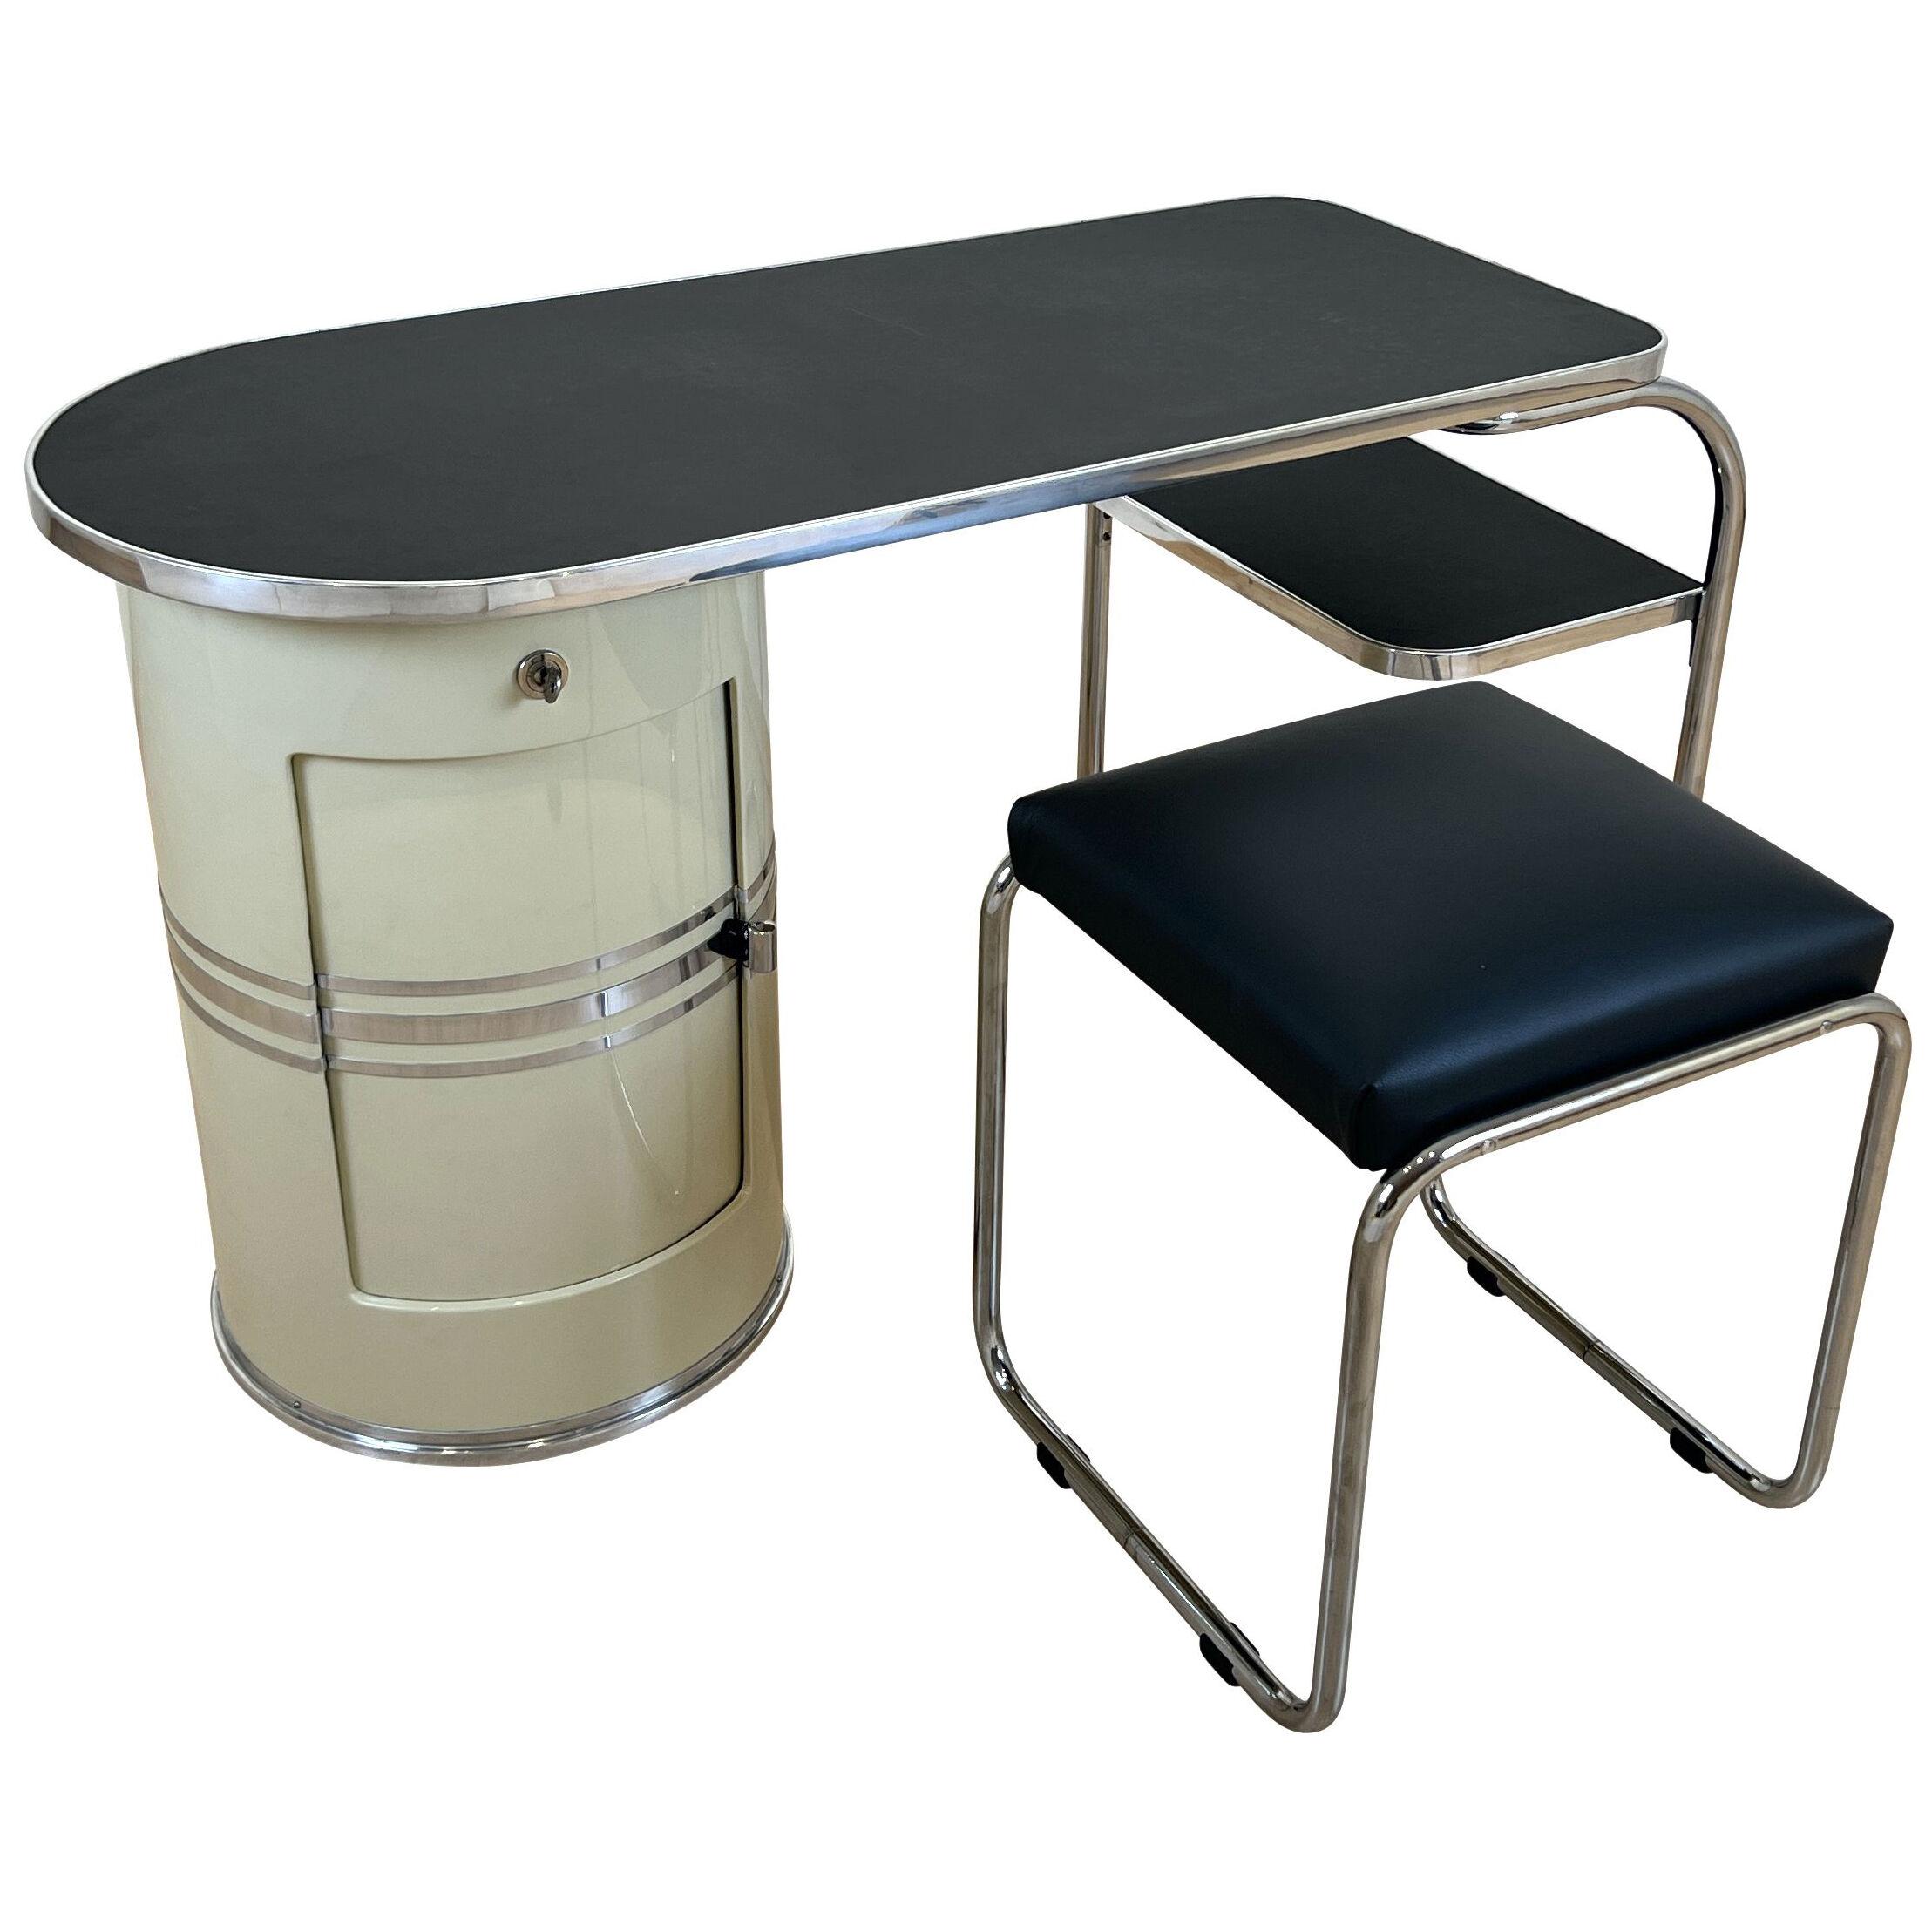 Bauhaus Desk and Stool by Mauser, Cream-white and Steeltubes, Germany circa 1940